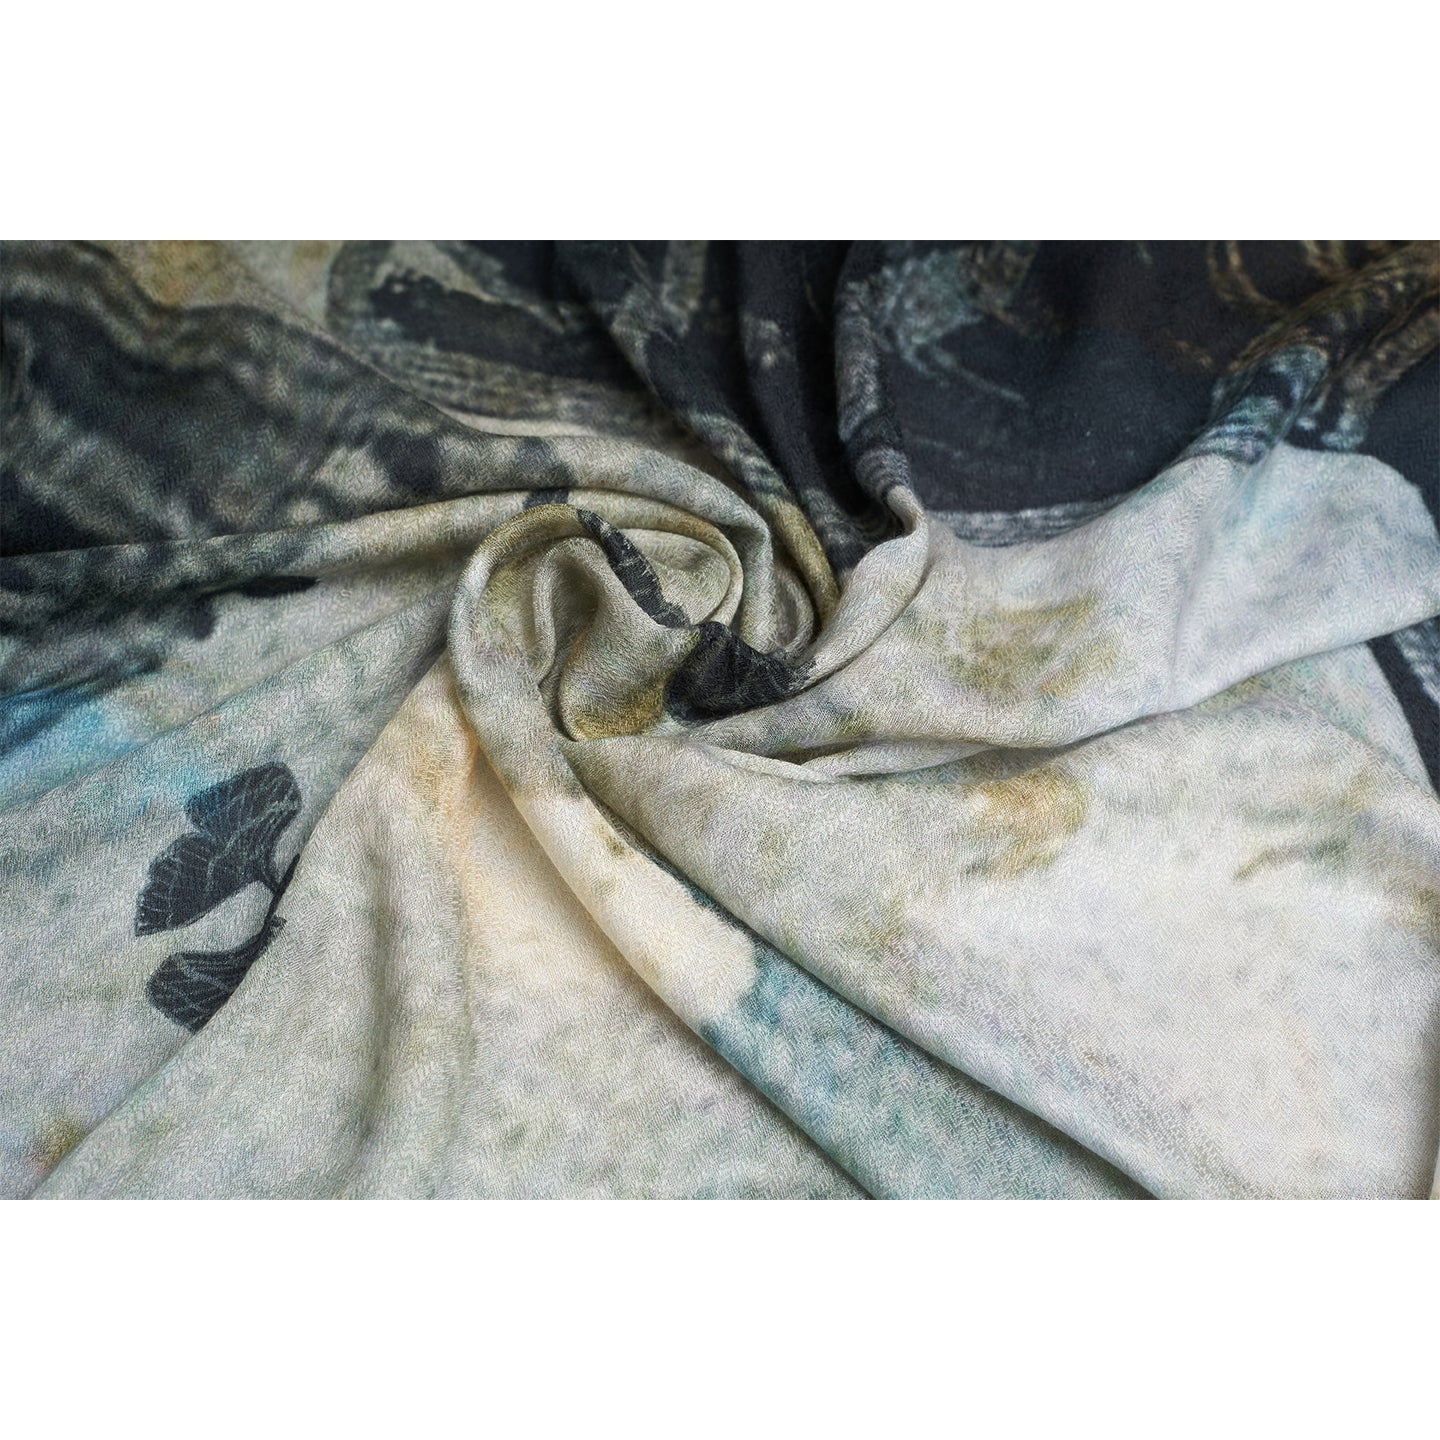  Sina Organic Aloe Vera Fabric Scarf, inspired by the timeless elegance of our Antique Reminiscence Collection. This exquisite scarf features hand-painted artwork depicting Royal Poinciana petals in various shapes and sizes, set against a sophisticated grey-gold background. 